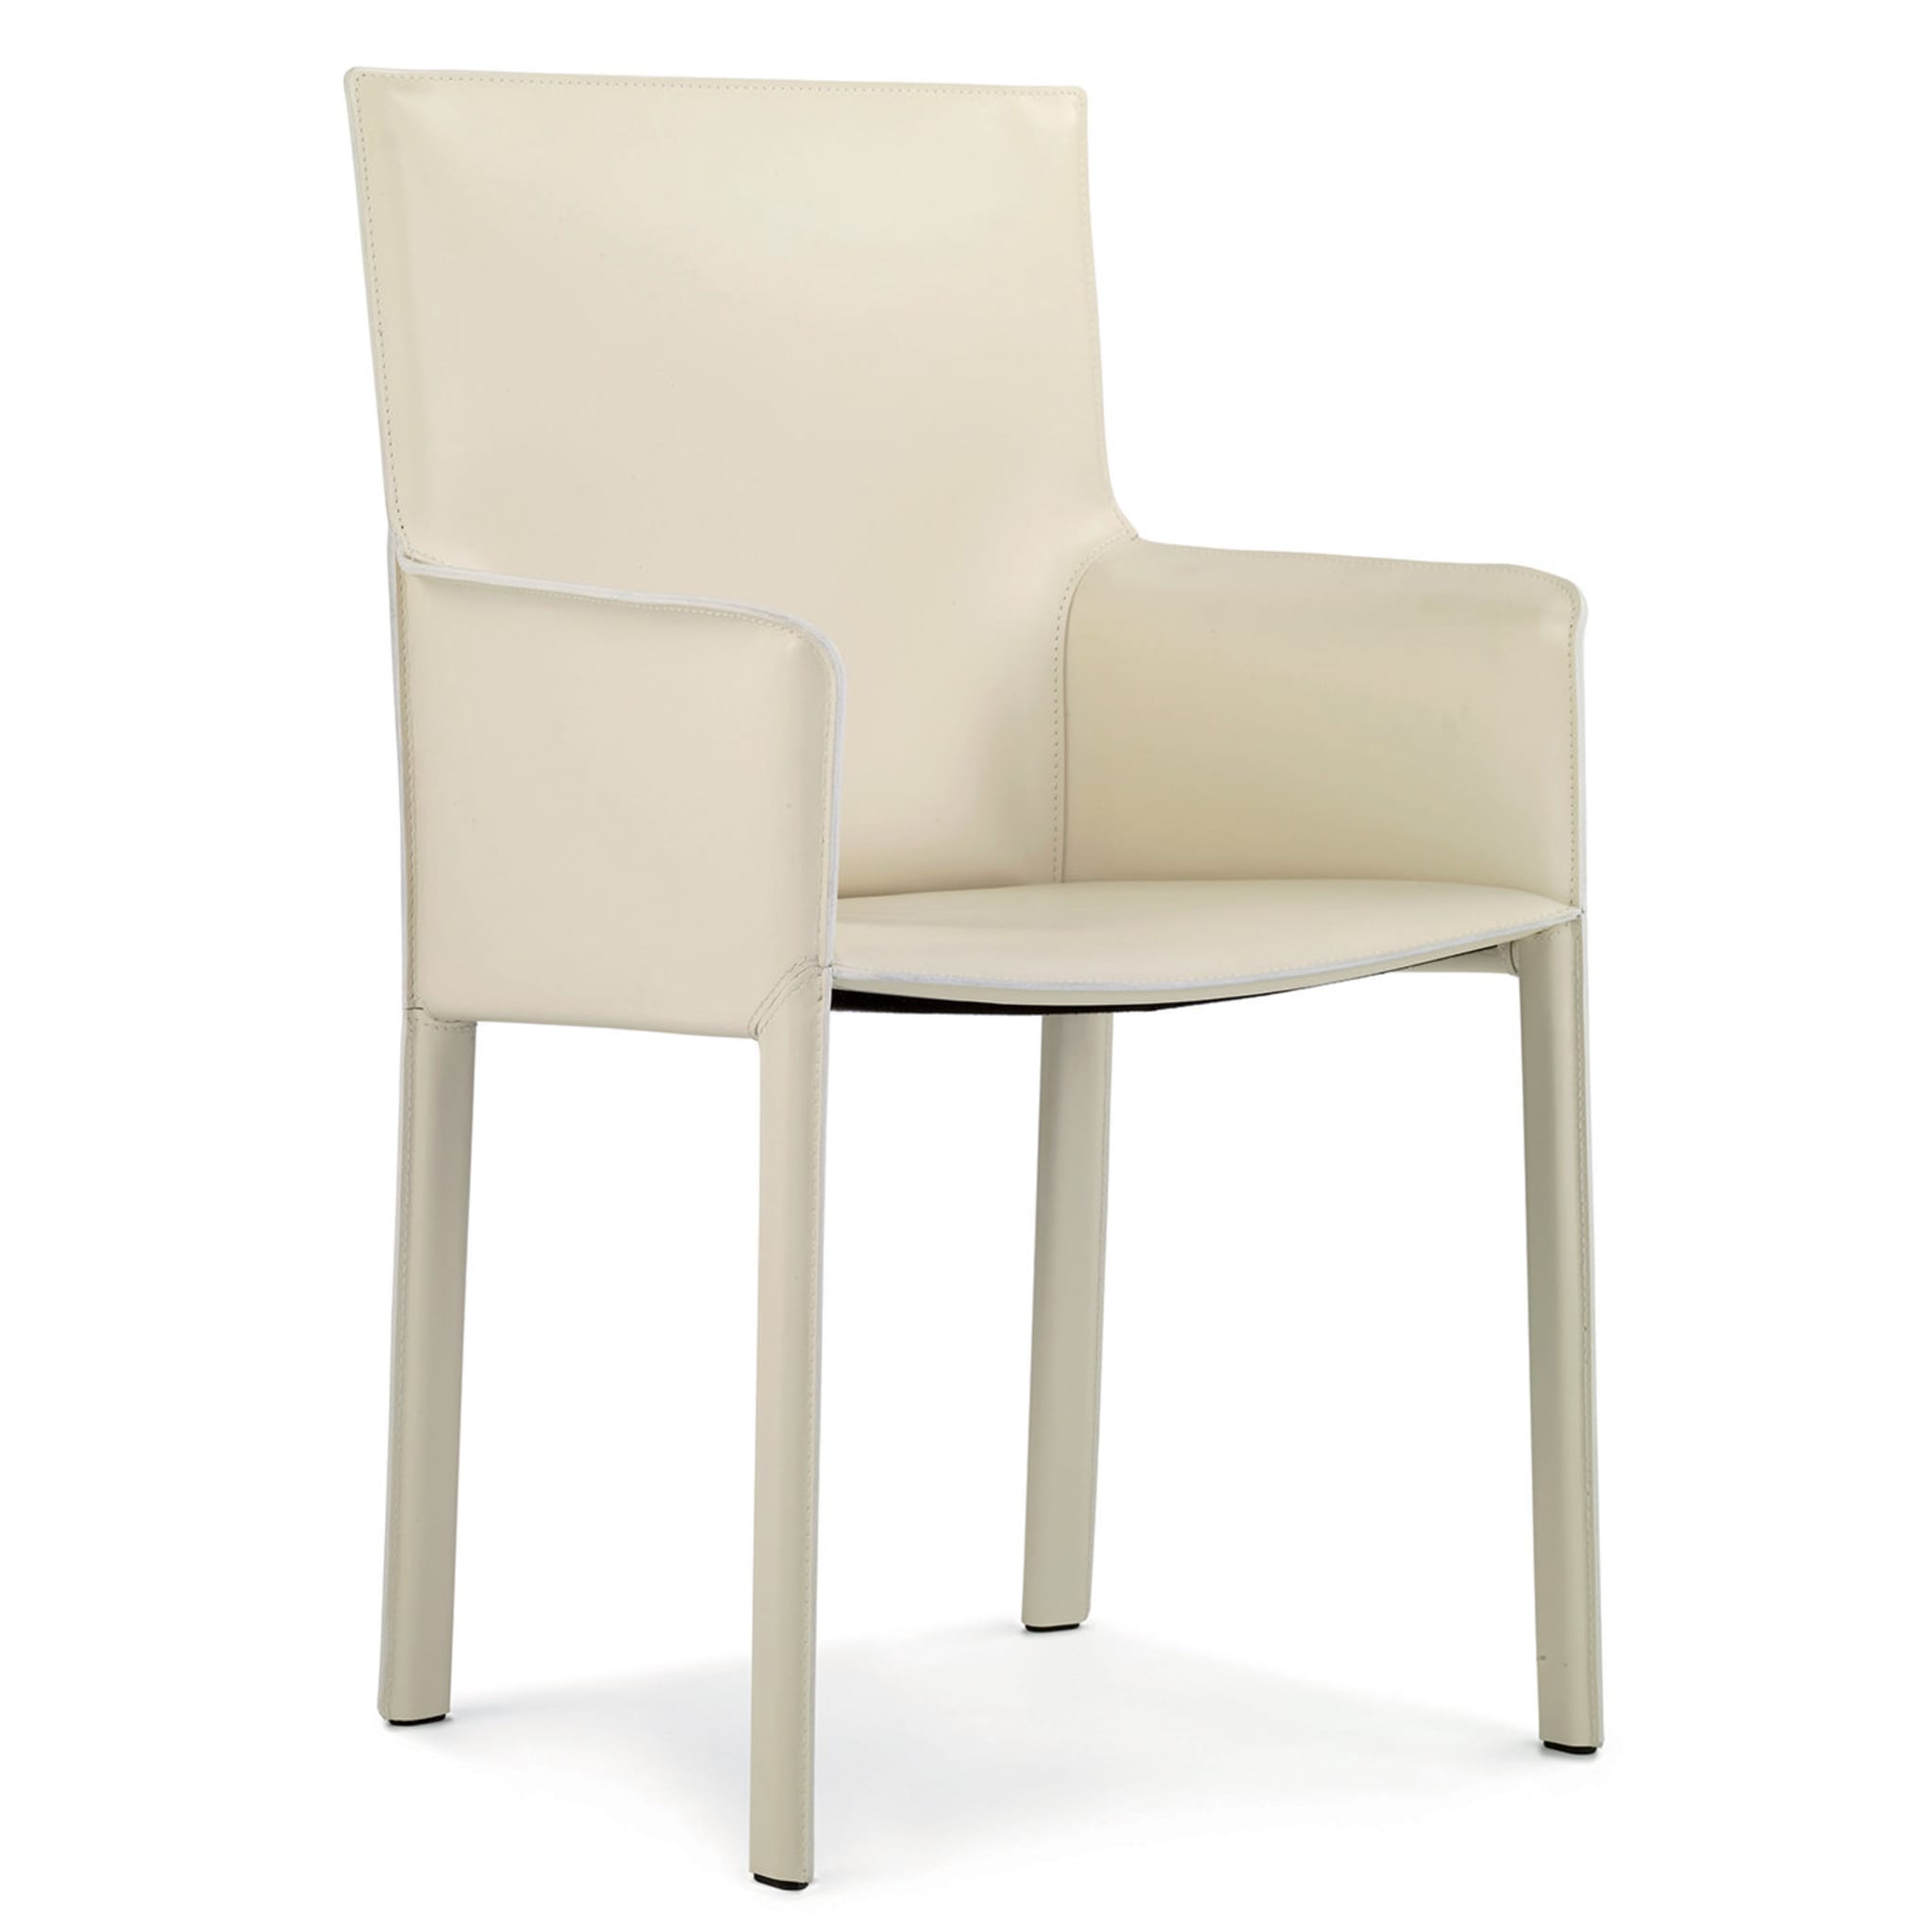 High-Back Pasqualina Chair by Grassi&Bianchi - Alternative view 1